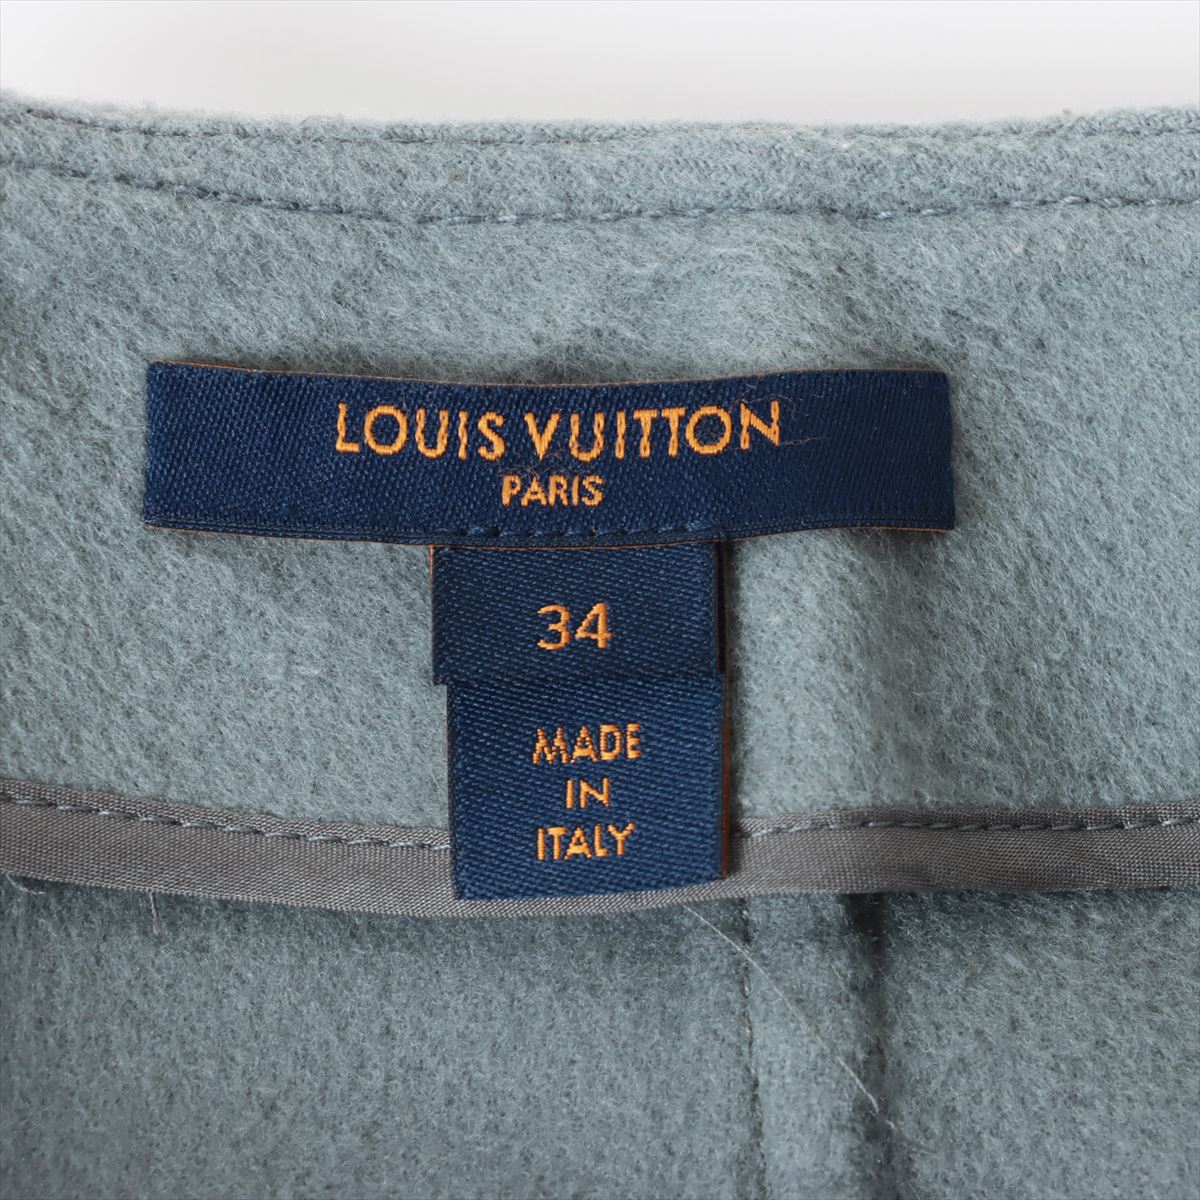 【LOUIS VUITTON】ルイヴィトン　シルク混　ブラウス　格子柄　34